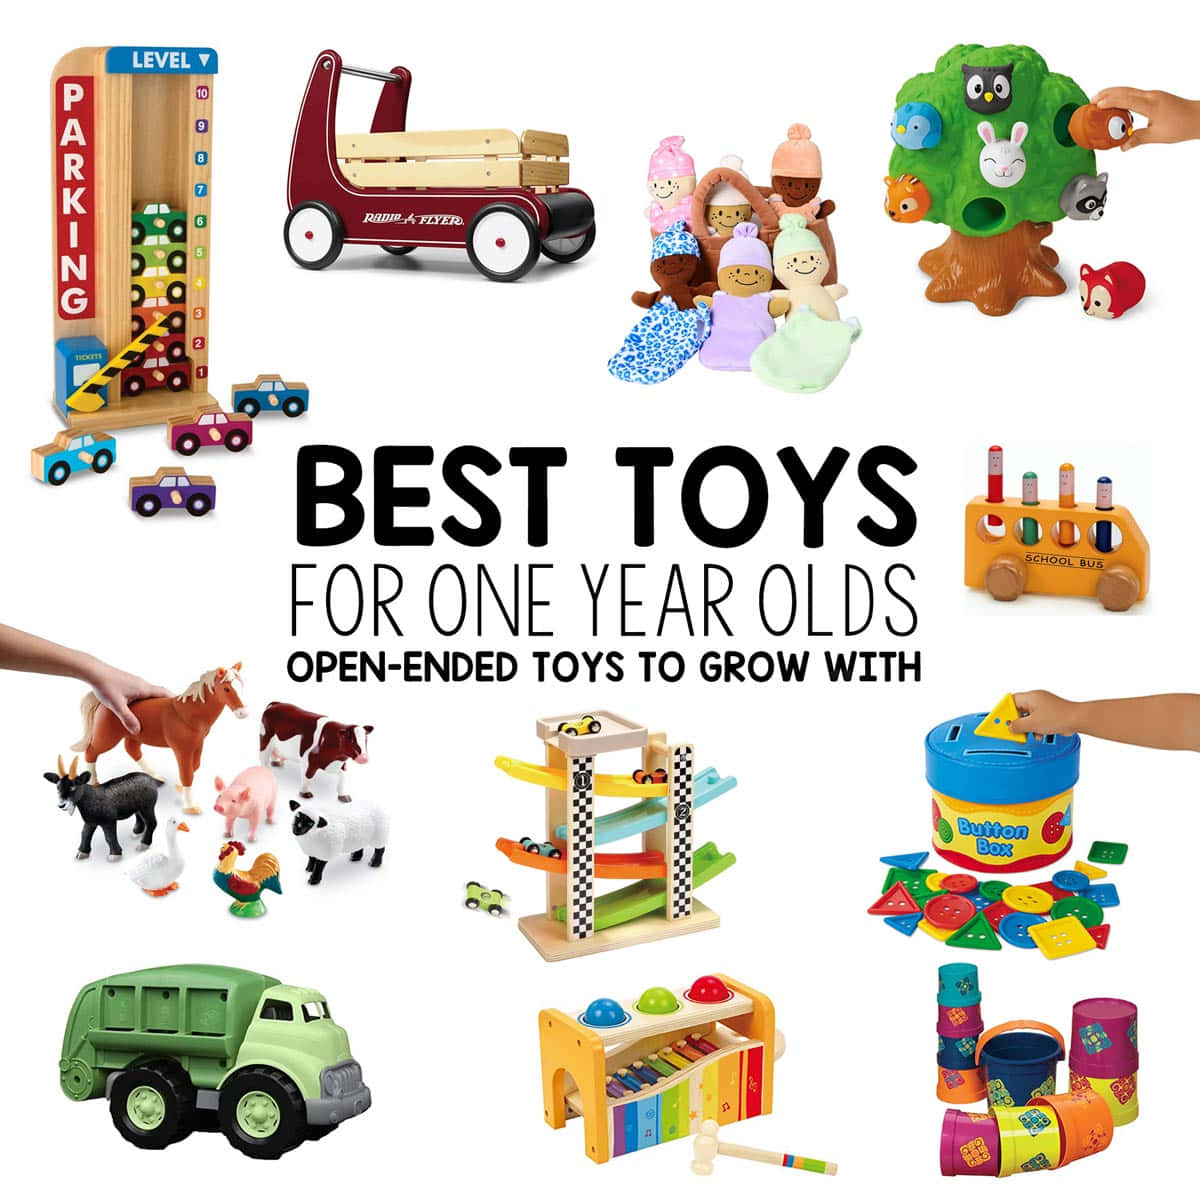 A collection of colorful, fun toys, perfect for any child!